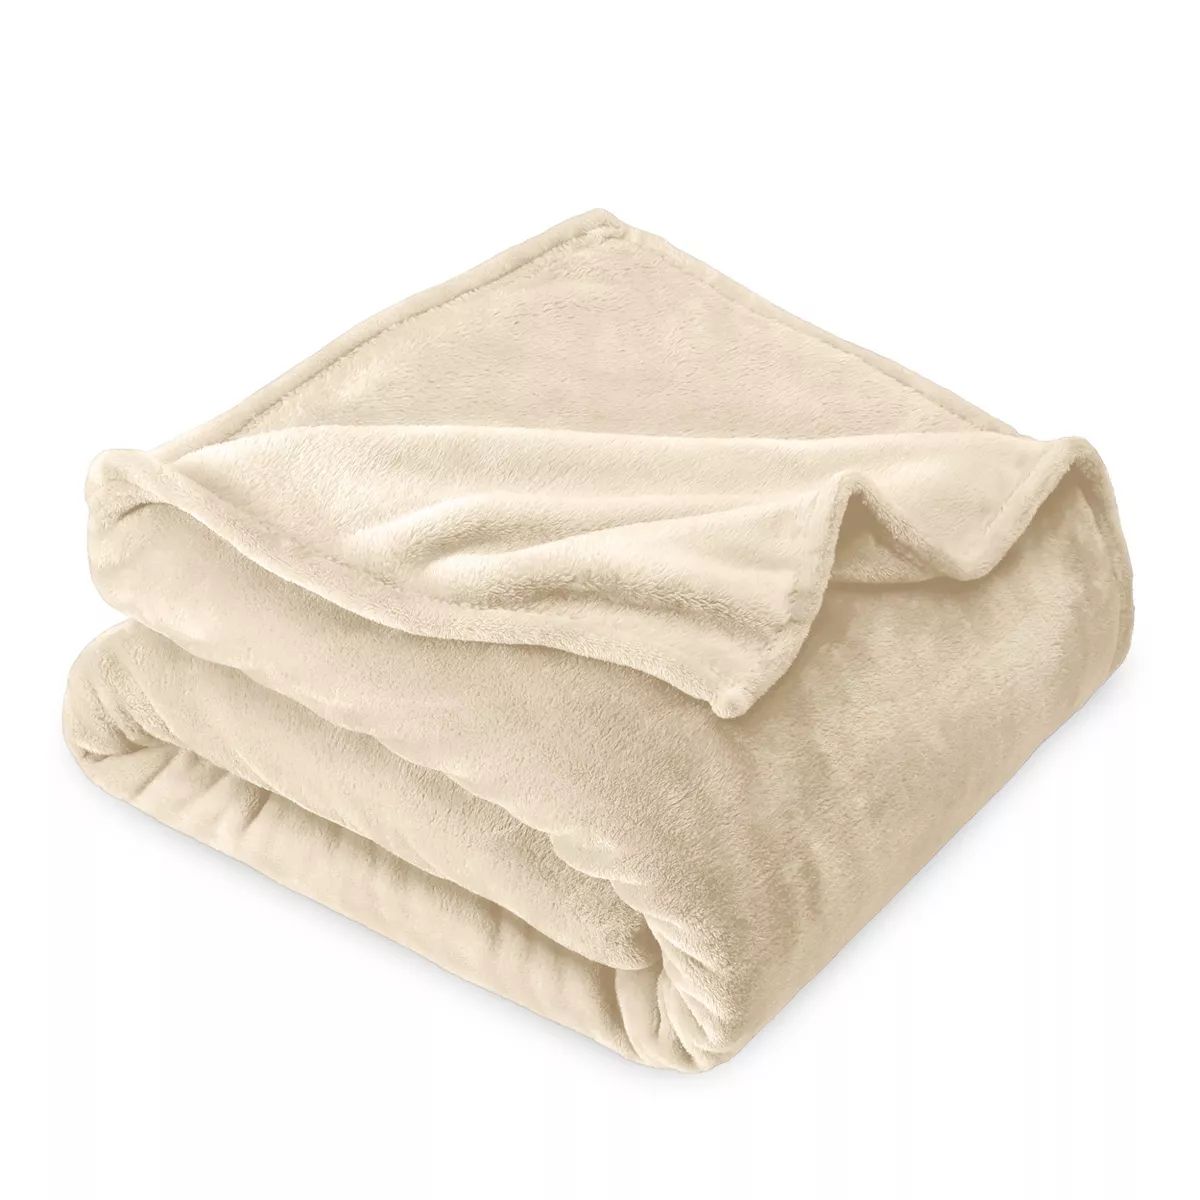 Microplush Fleece Bed Blanket by Bare Home | Target